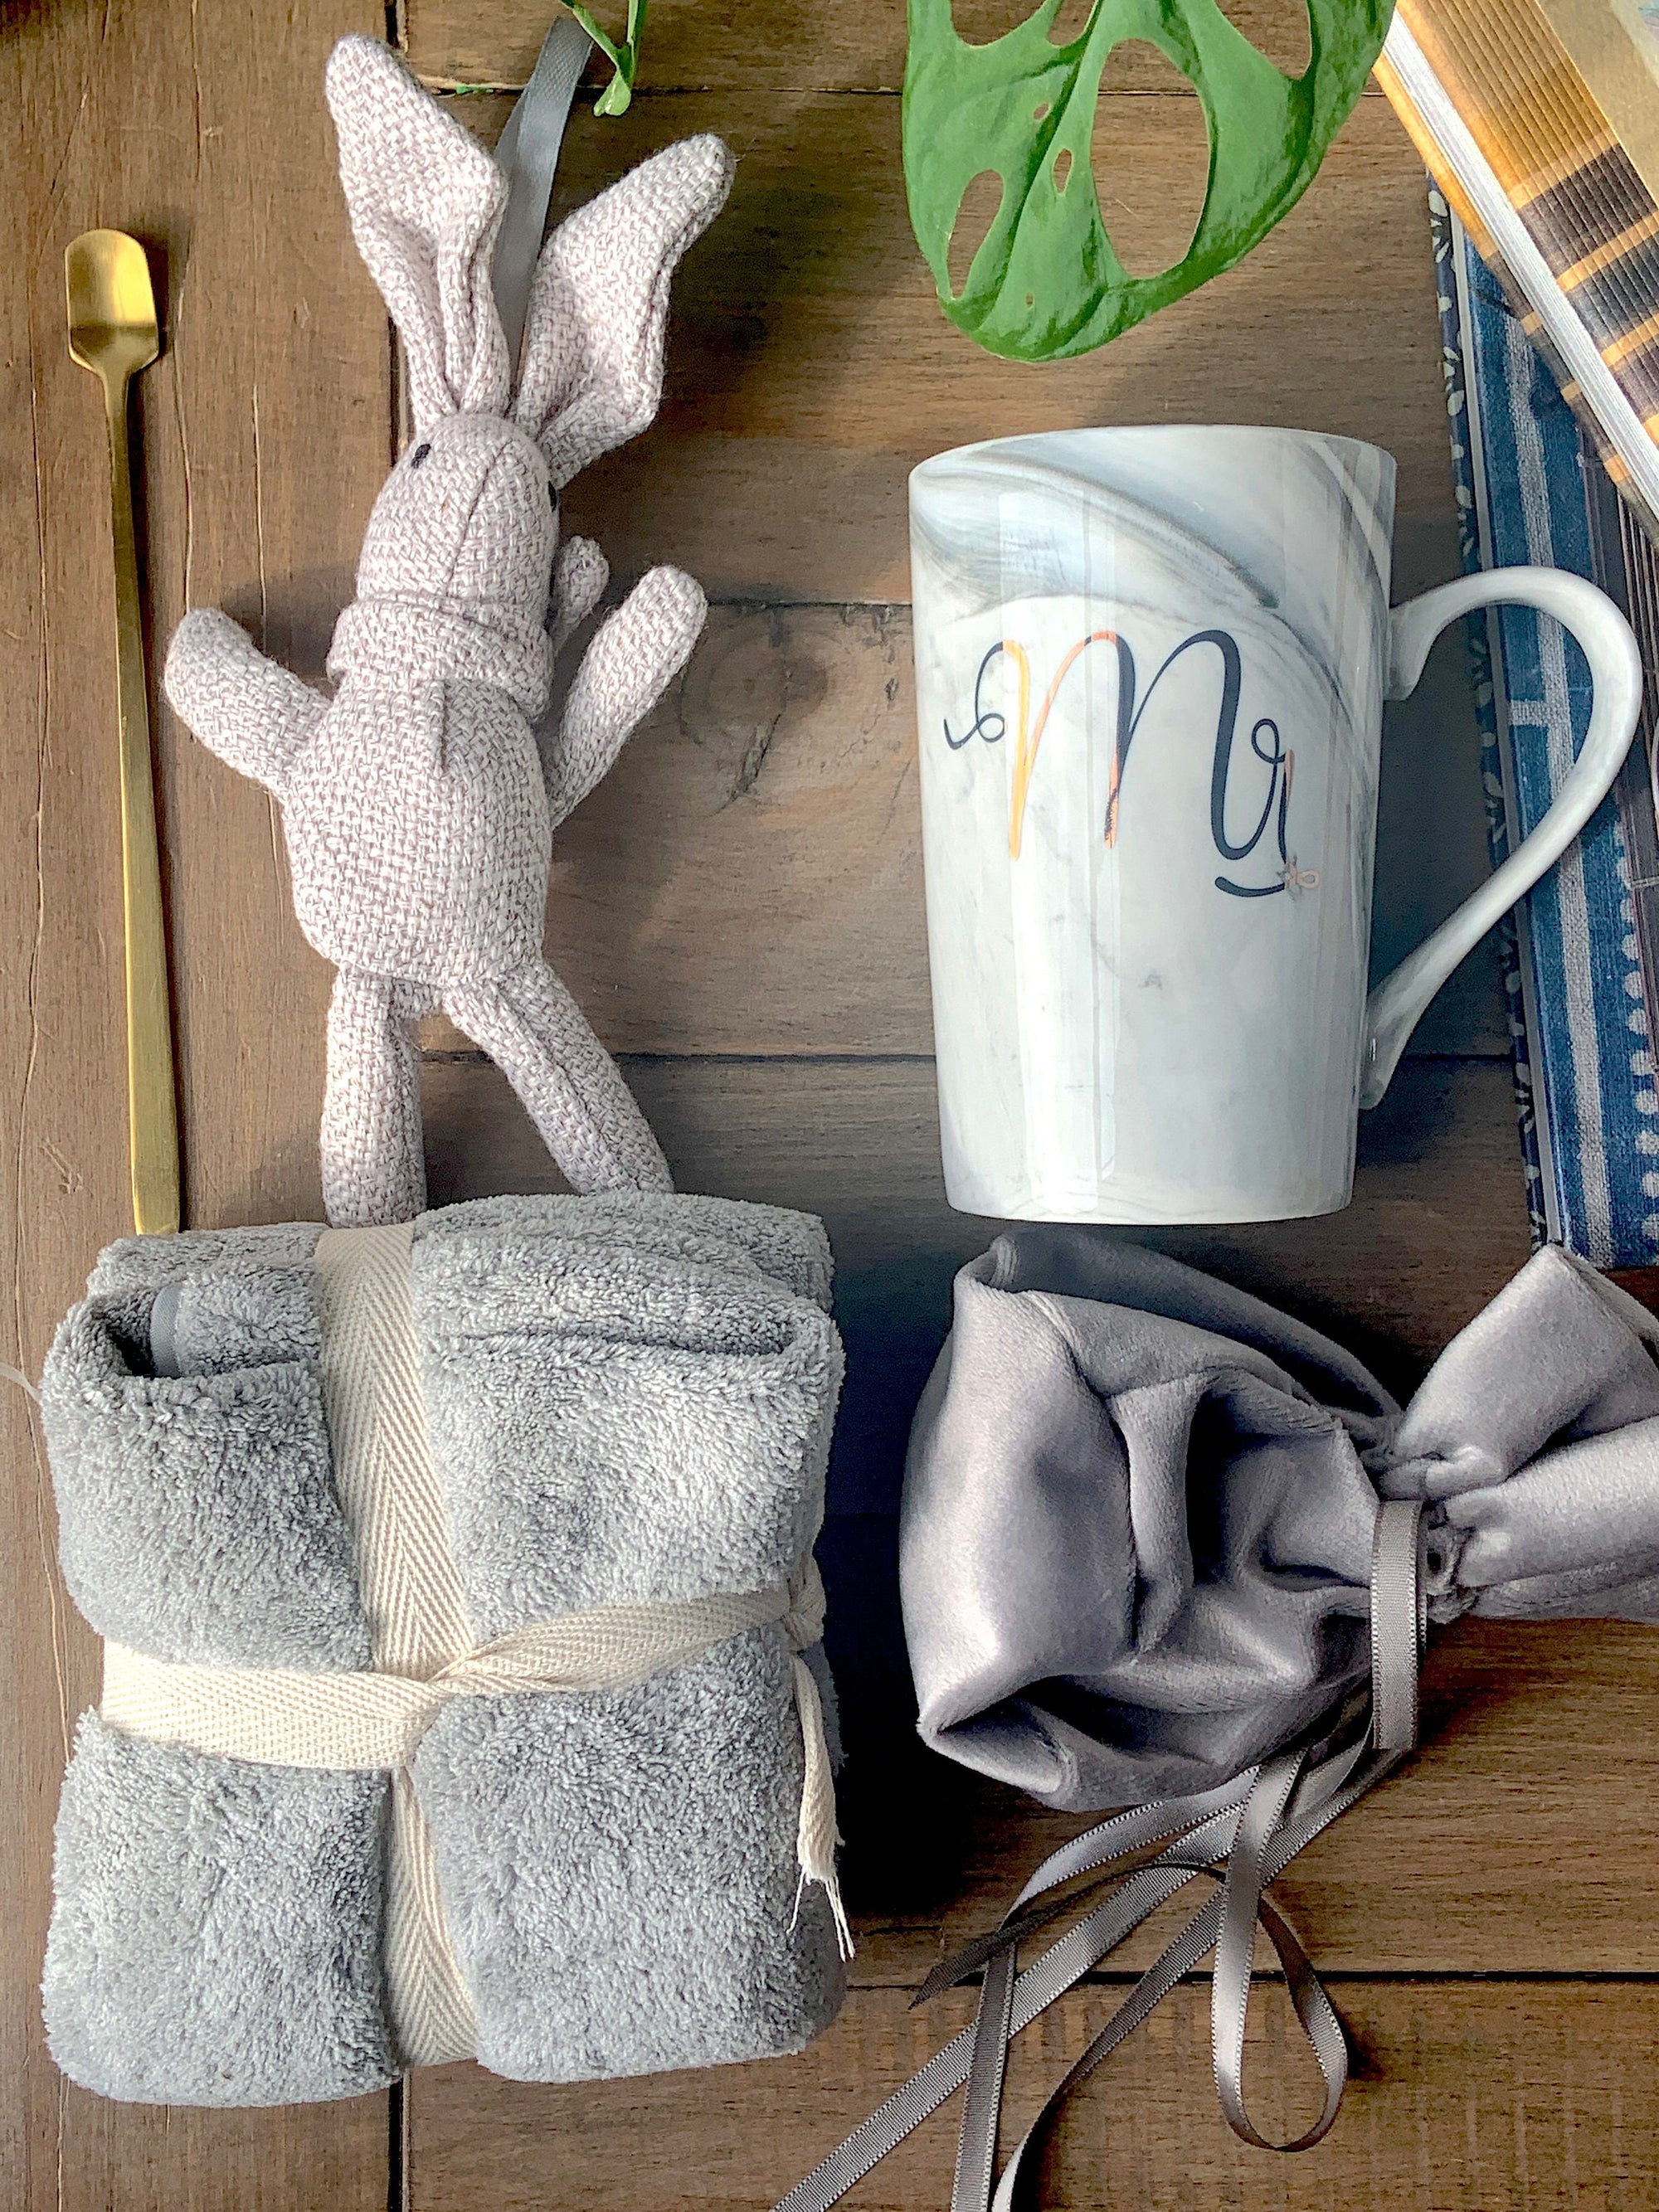 Gift Box Set of 5 Porcelain Tall Tea Coffee Cup Plush Hand Towel, Velvet Sugar Pouch, Long Gold Spoon, Wishing Rabbit in a Gift Bag Him Her  54.99 Indigo Paisley